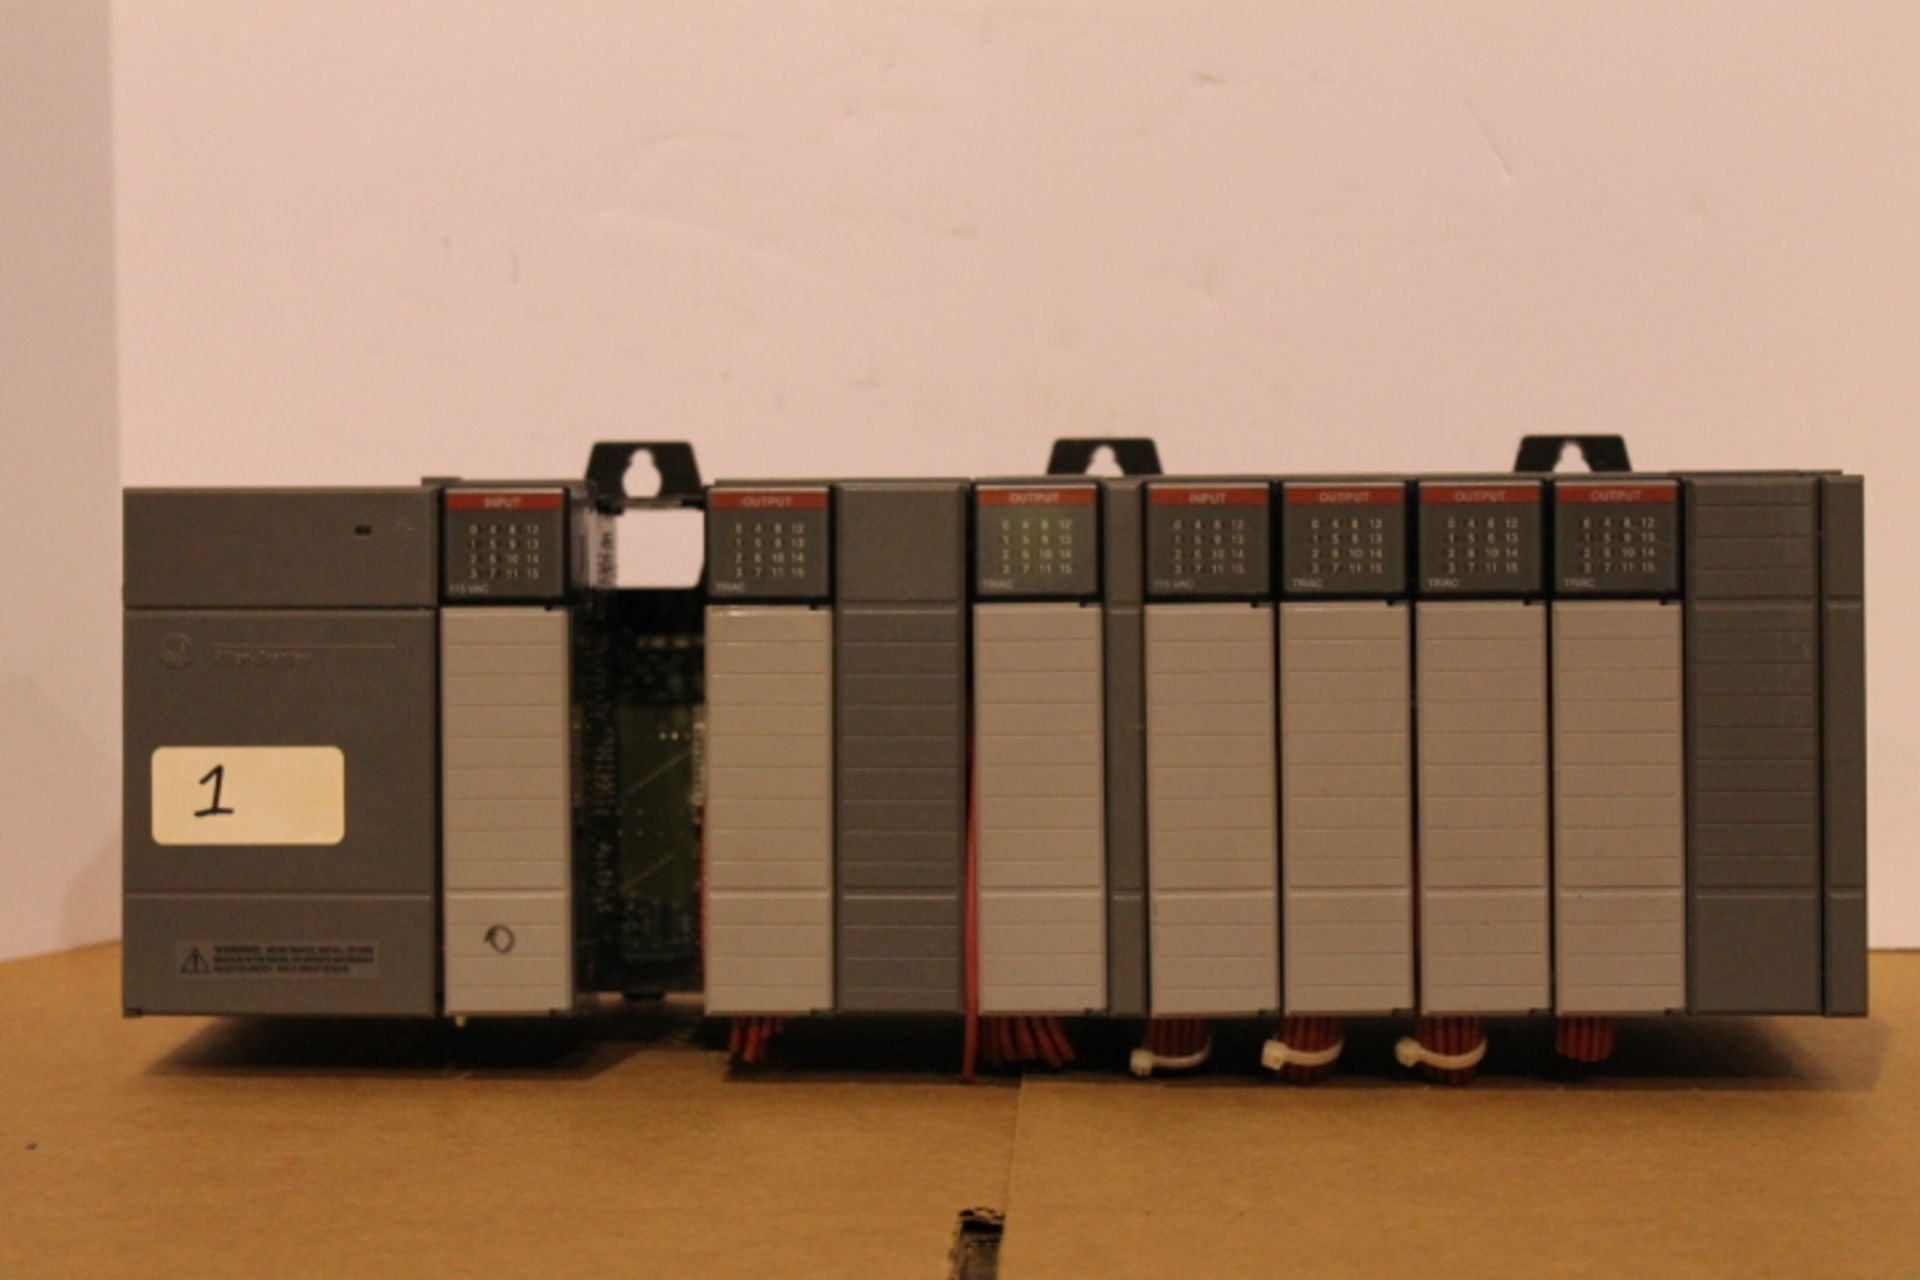 ALLEN-BRADLEY SLC 500 RACK W/ VARIOUS CARDS (SEE PICTURES) & 1746-P2 POWER SUPPLY